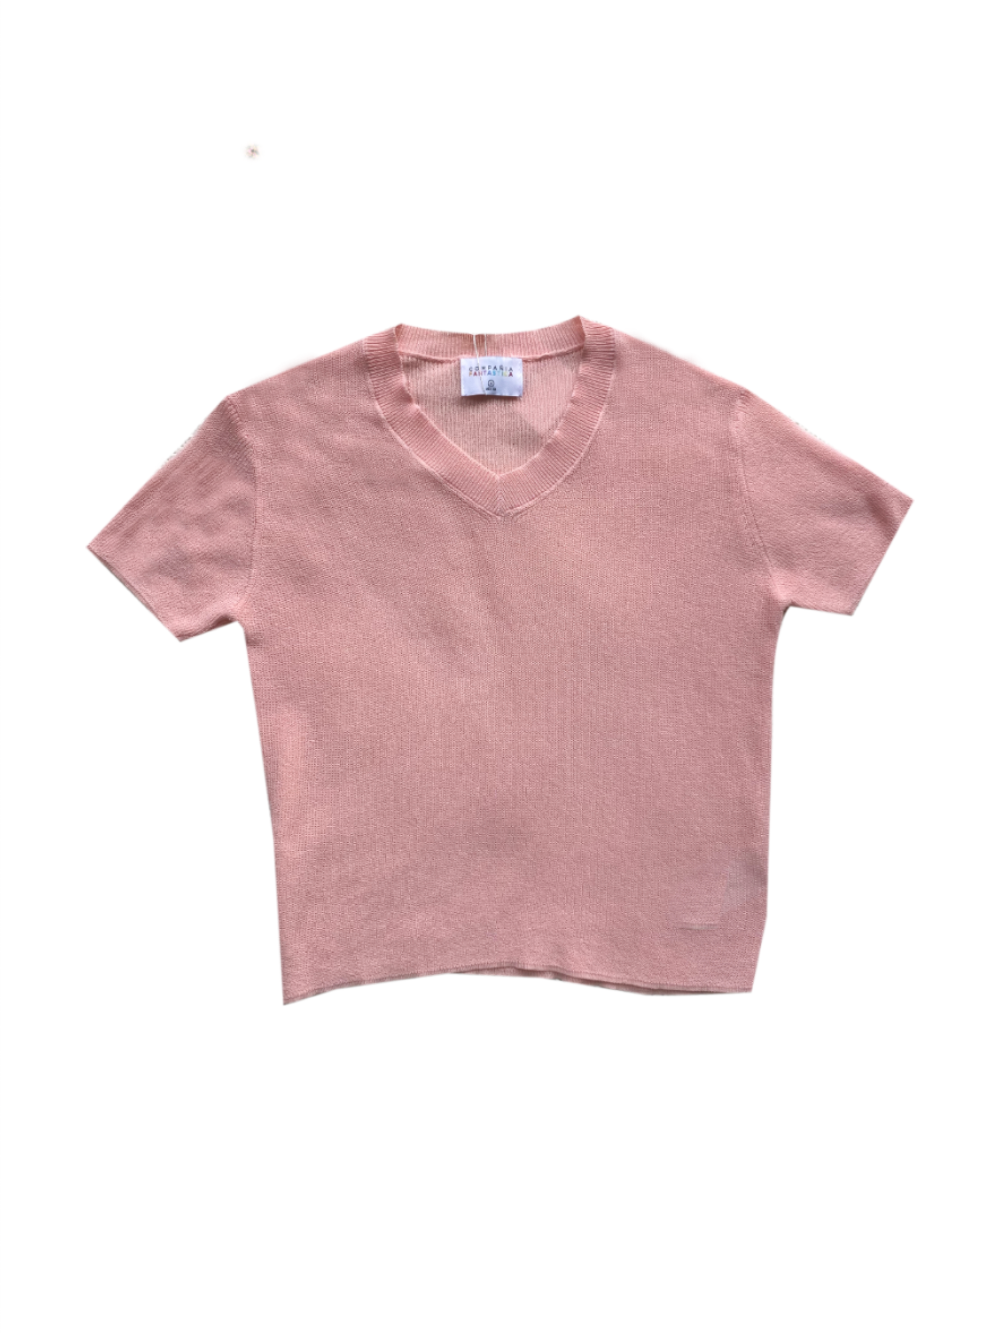 COMPANIA FANTASTICA pink knitted t-shirt blouse S